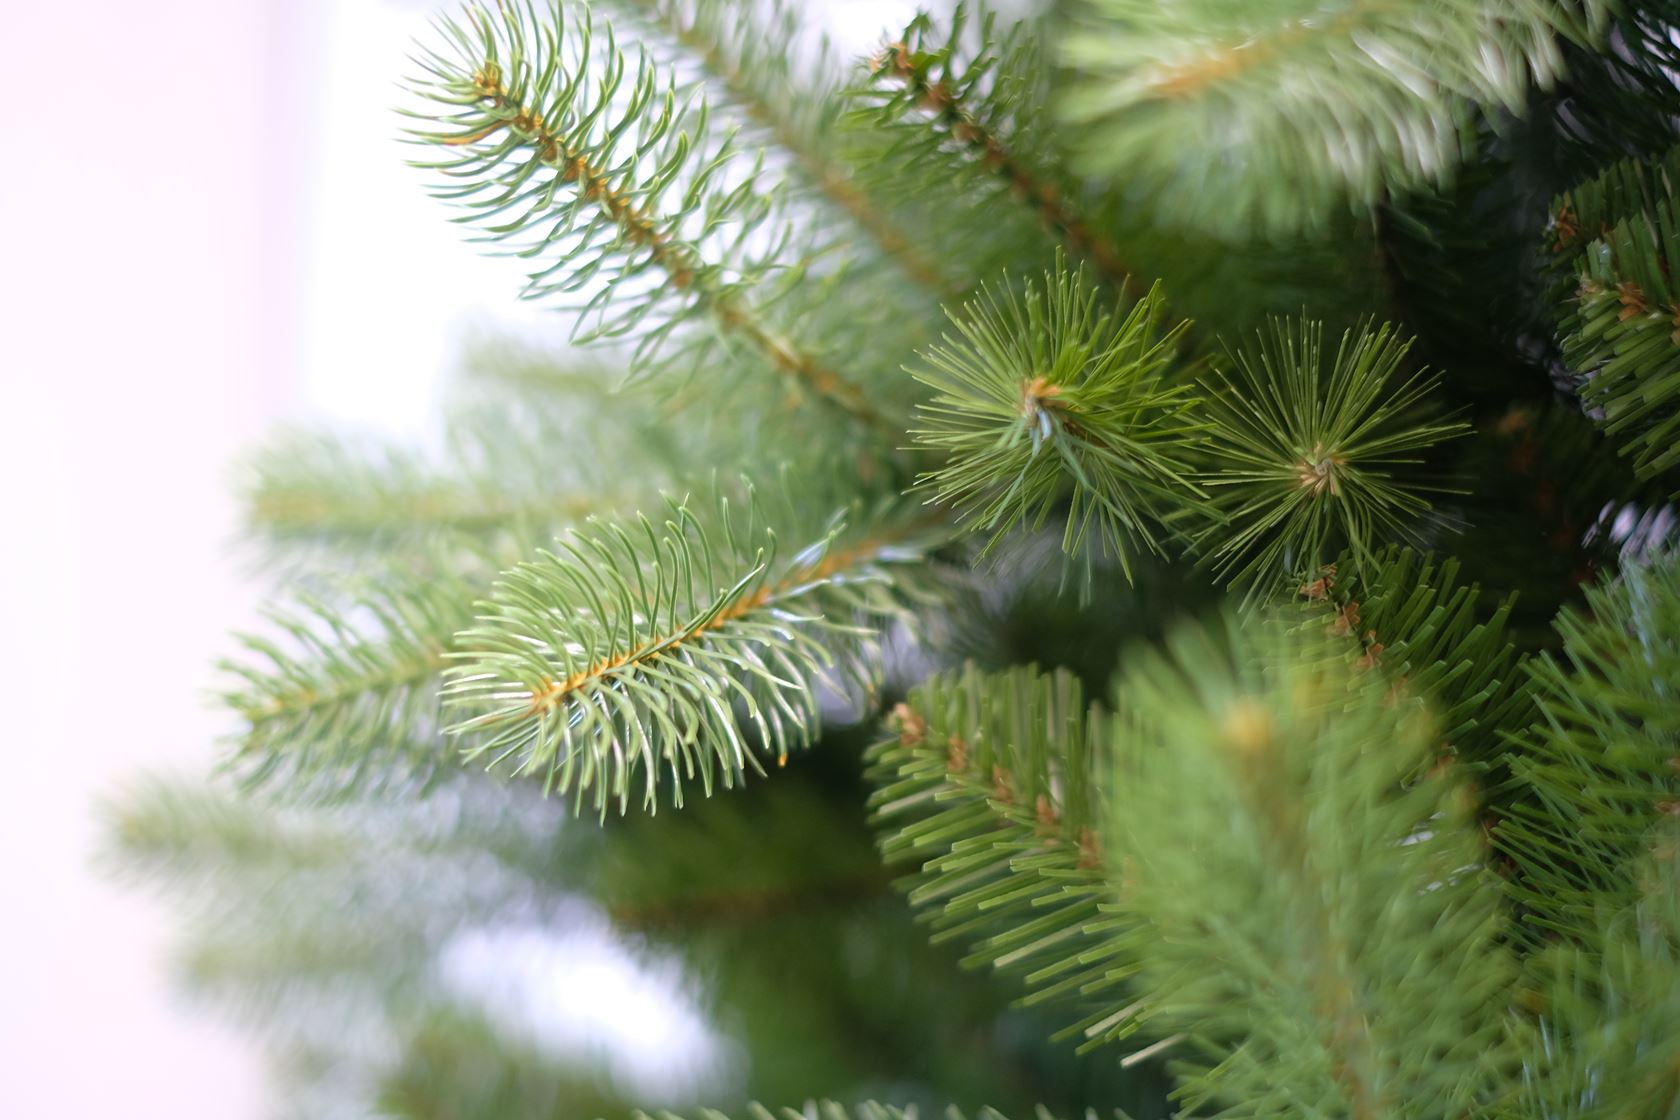 Poly-Bayberry-Spruce-Hinged-h243cm